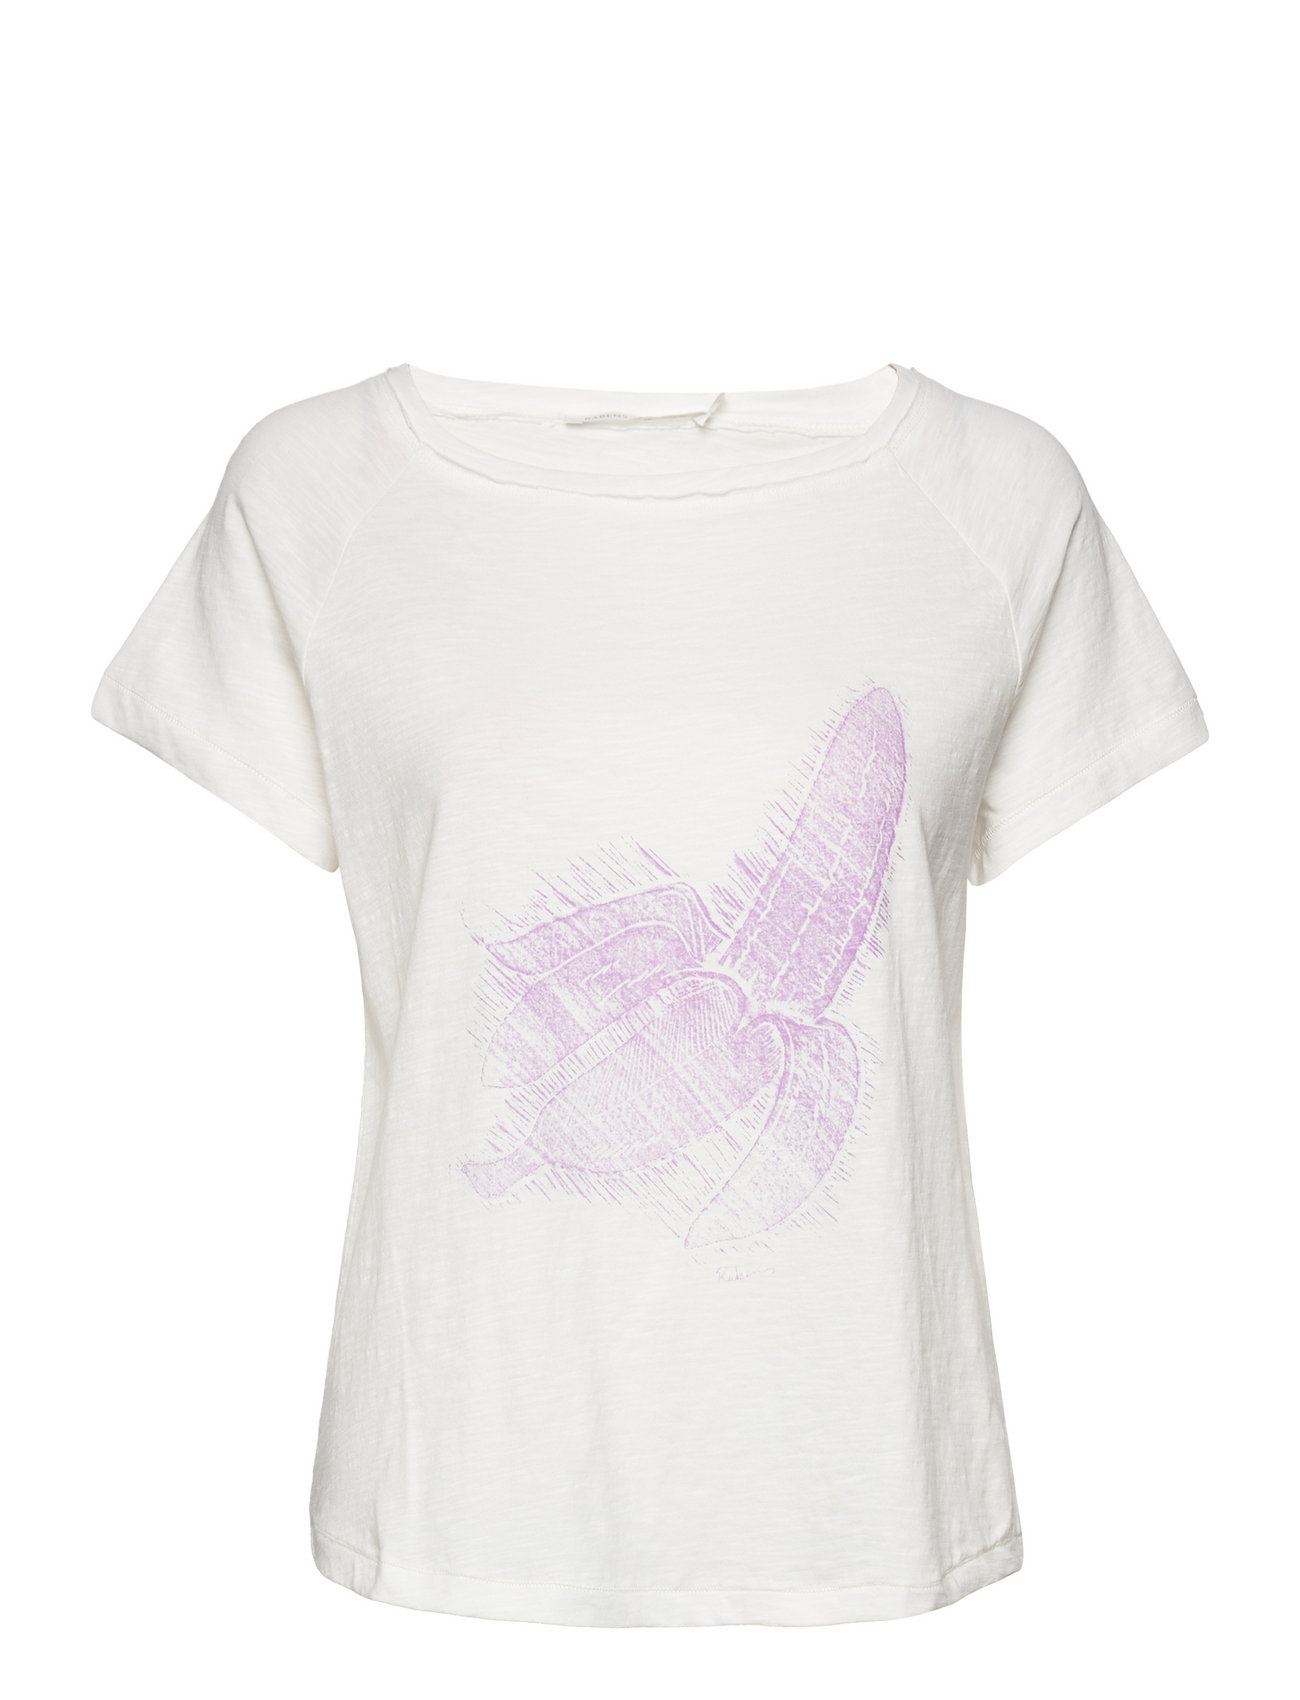 Sally Tops T-shirts & Tops Short-sleeved White Rabens Sal R